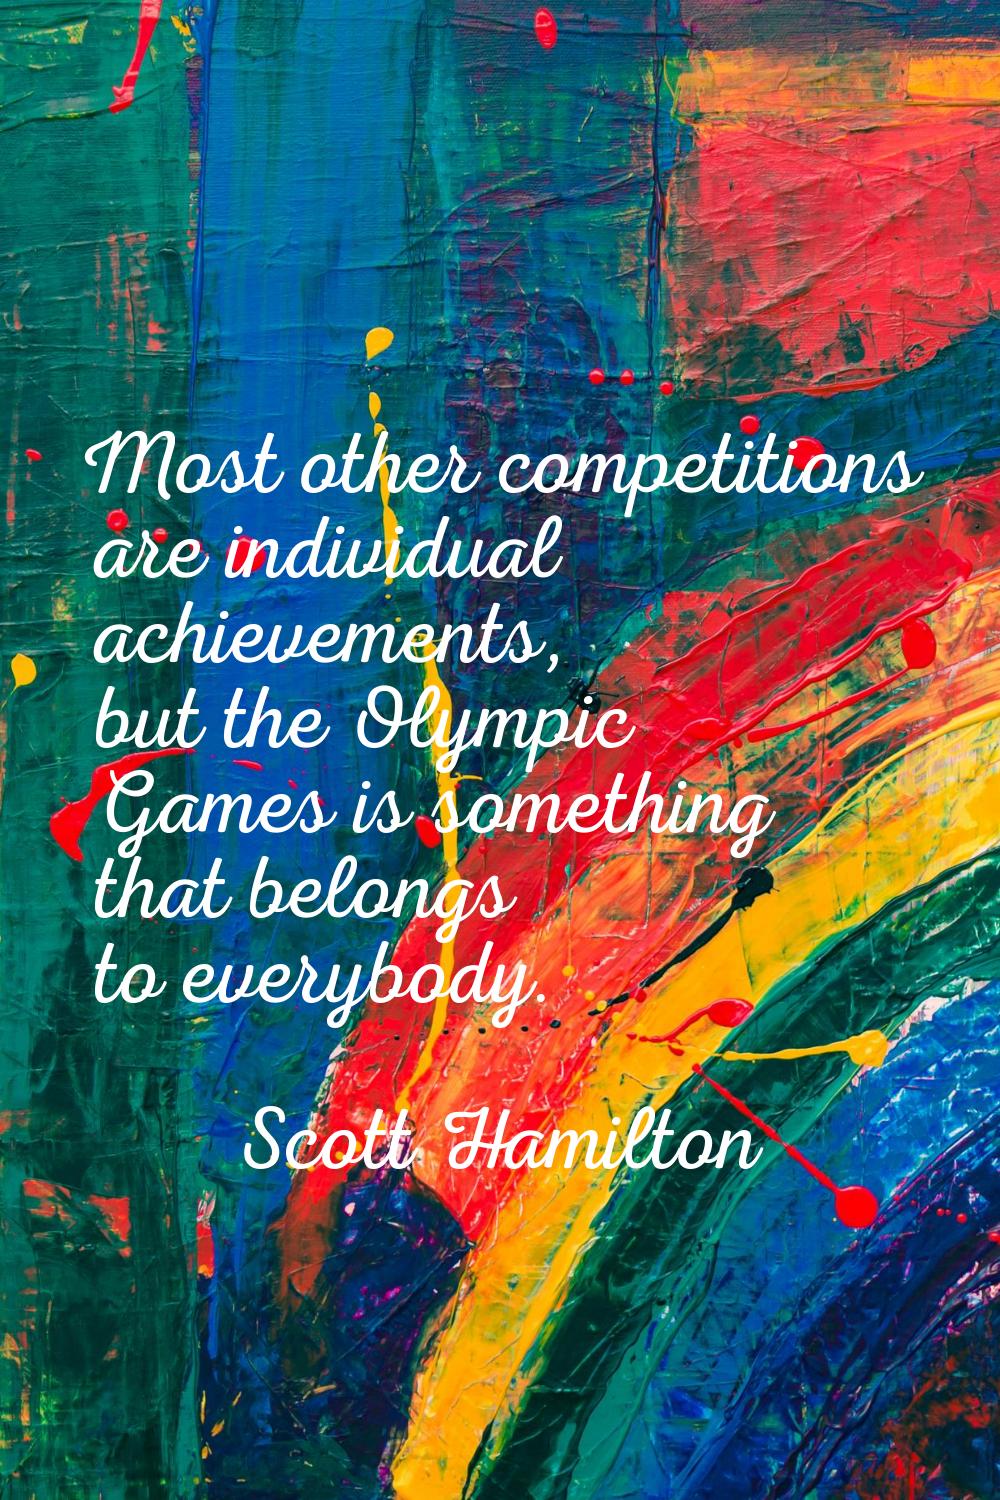 Most other competitions are individual achievements, but the Olympic Games is something that belong